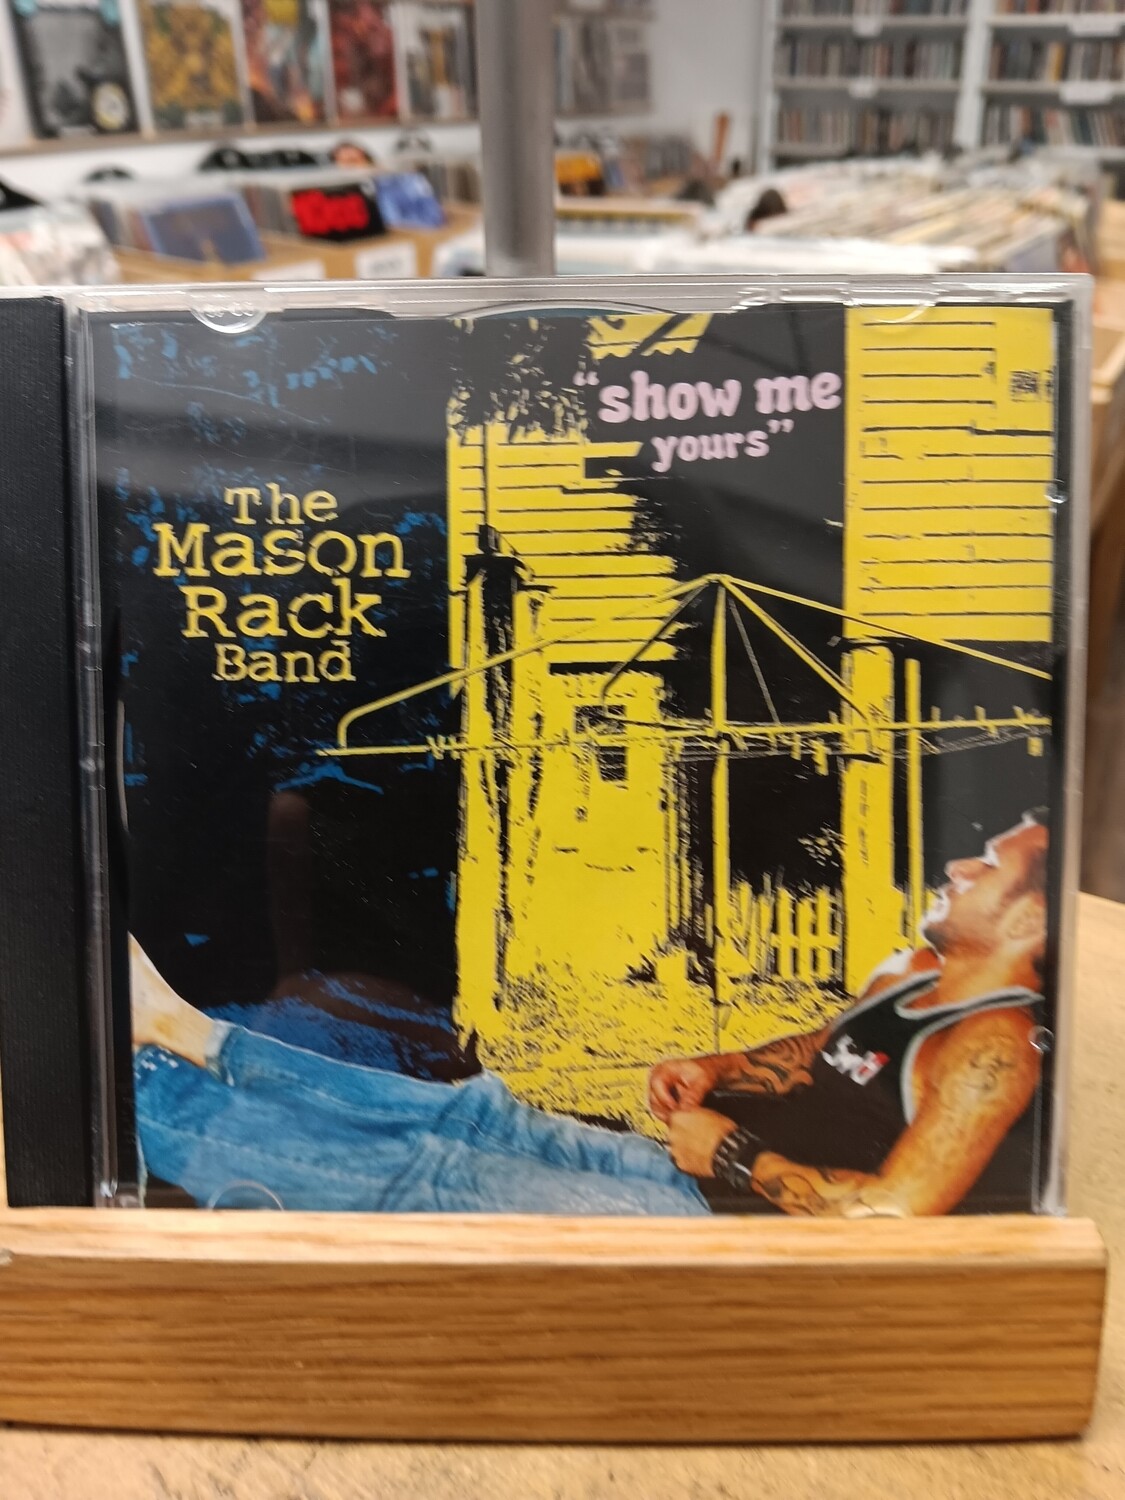 THE MASON RACK BAND - Show me yours (CD)